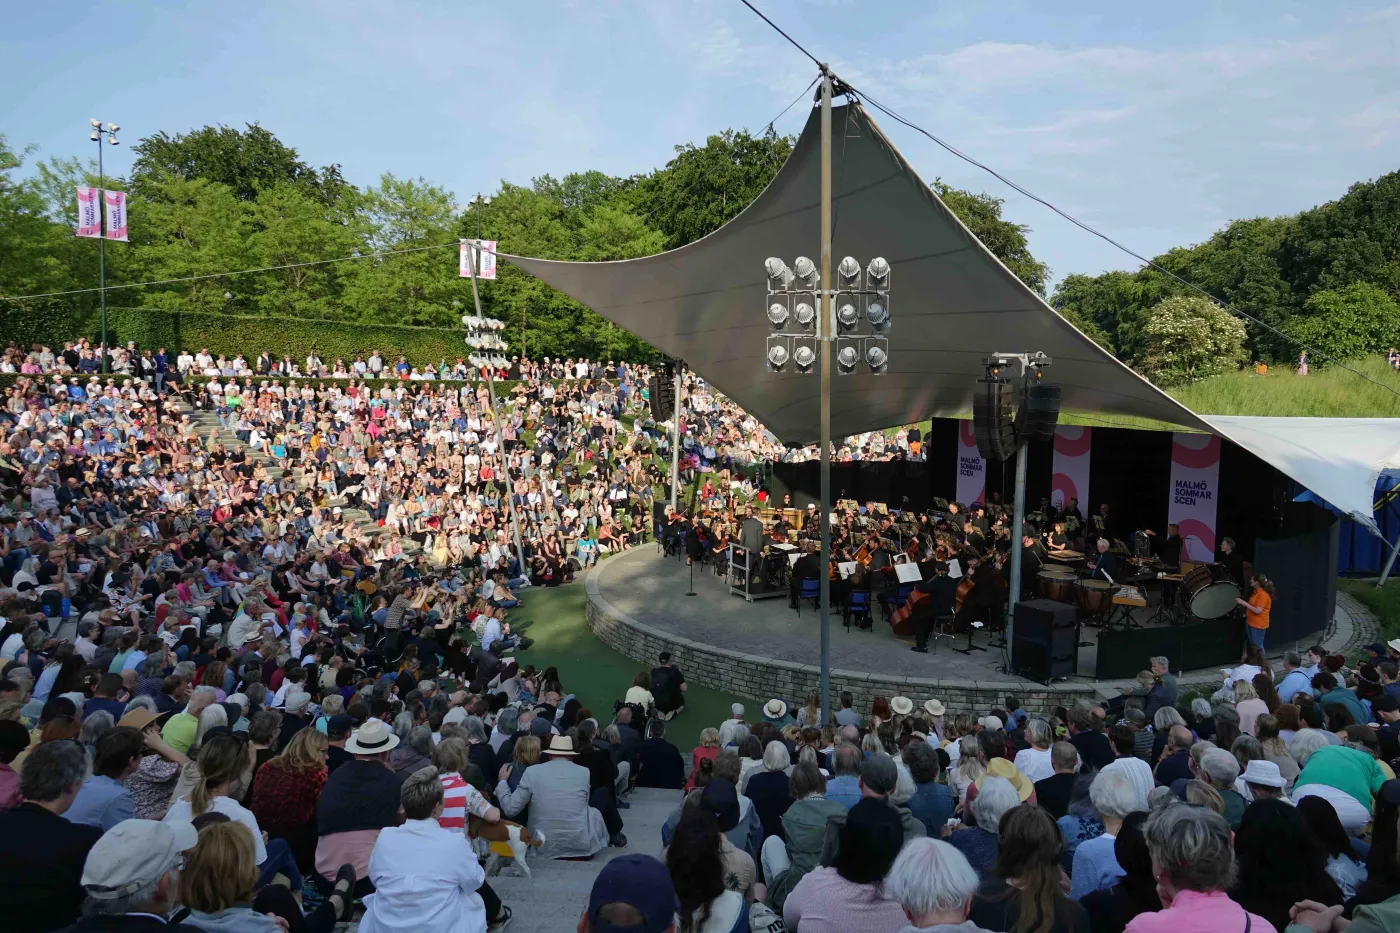 Summer Concert in Pildammsparken with Malmo Symphony Orchestra